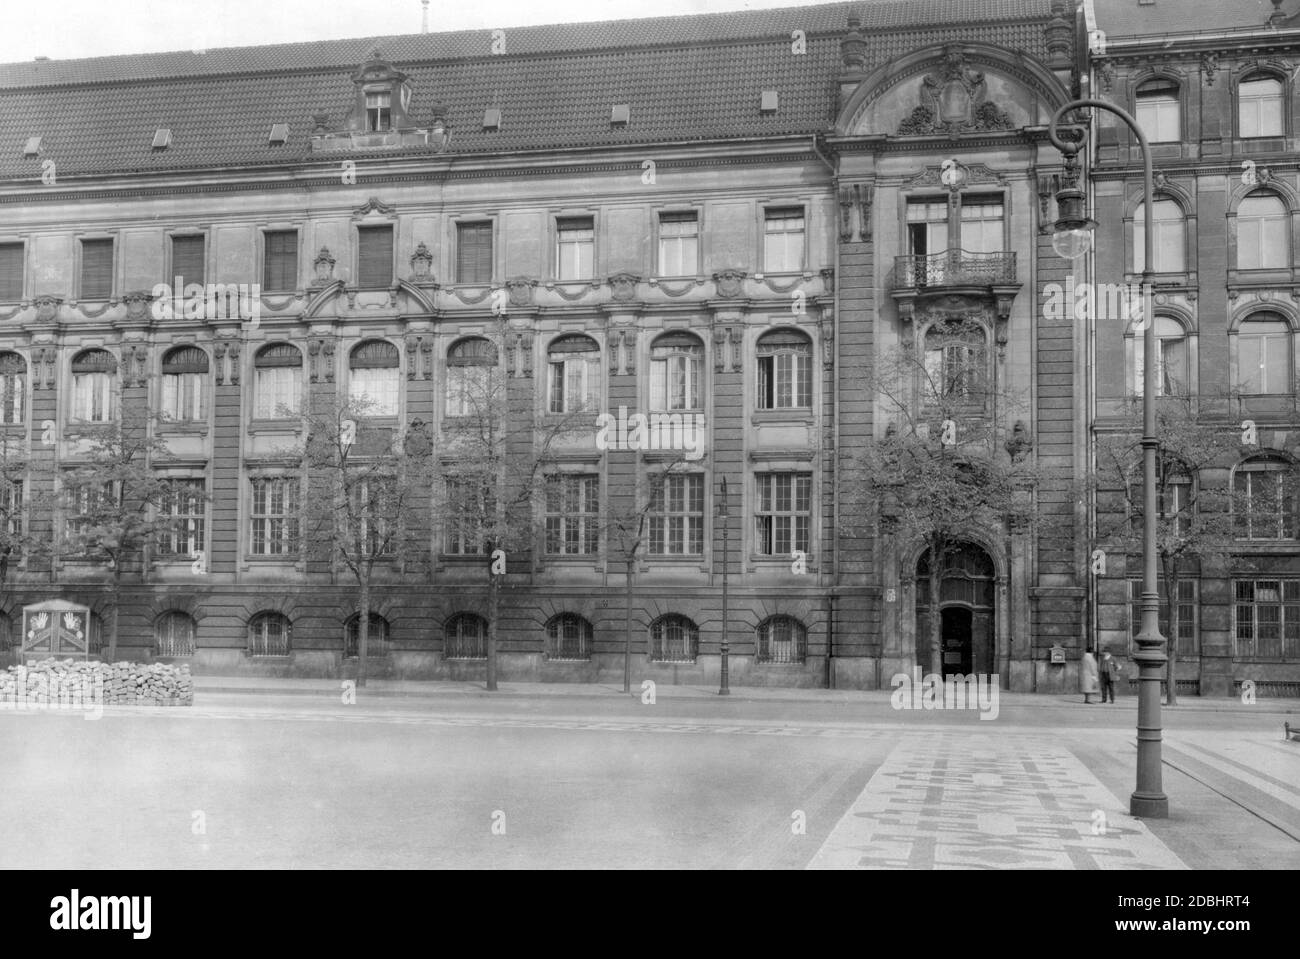 'The photograph shows the Preussische Staatsbank at Gendarmenmarkt on the corner of Jaegerstrasse in Berlin in 1930, which is now the seat of the Berlin-Brandenburg Academy of Sciences and Humanities. On the left, two posters advertise ''Spidolin AUTO OEL''.' Stock Photo